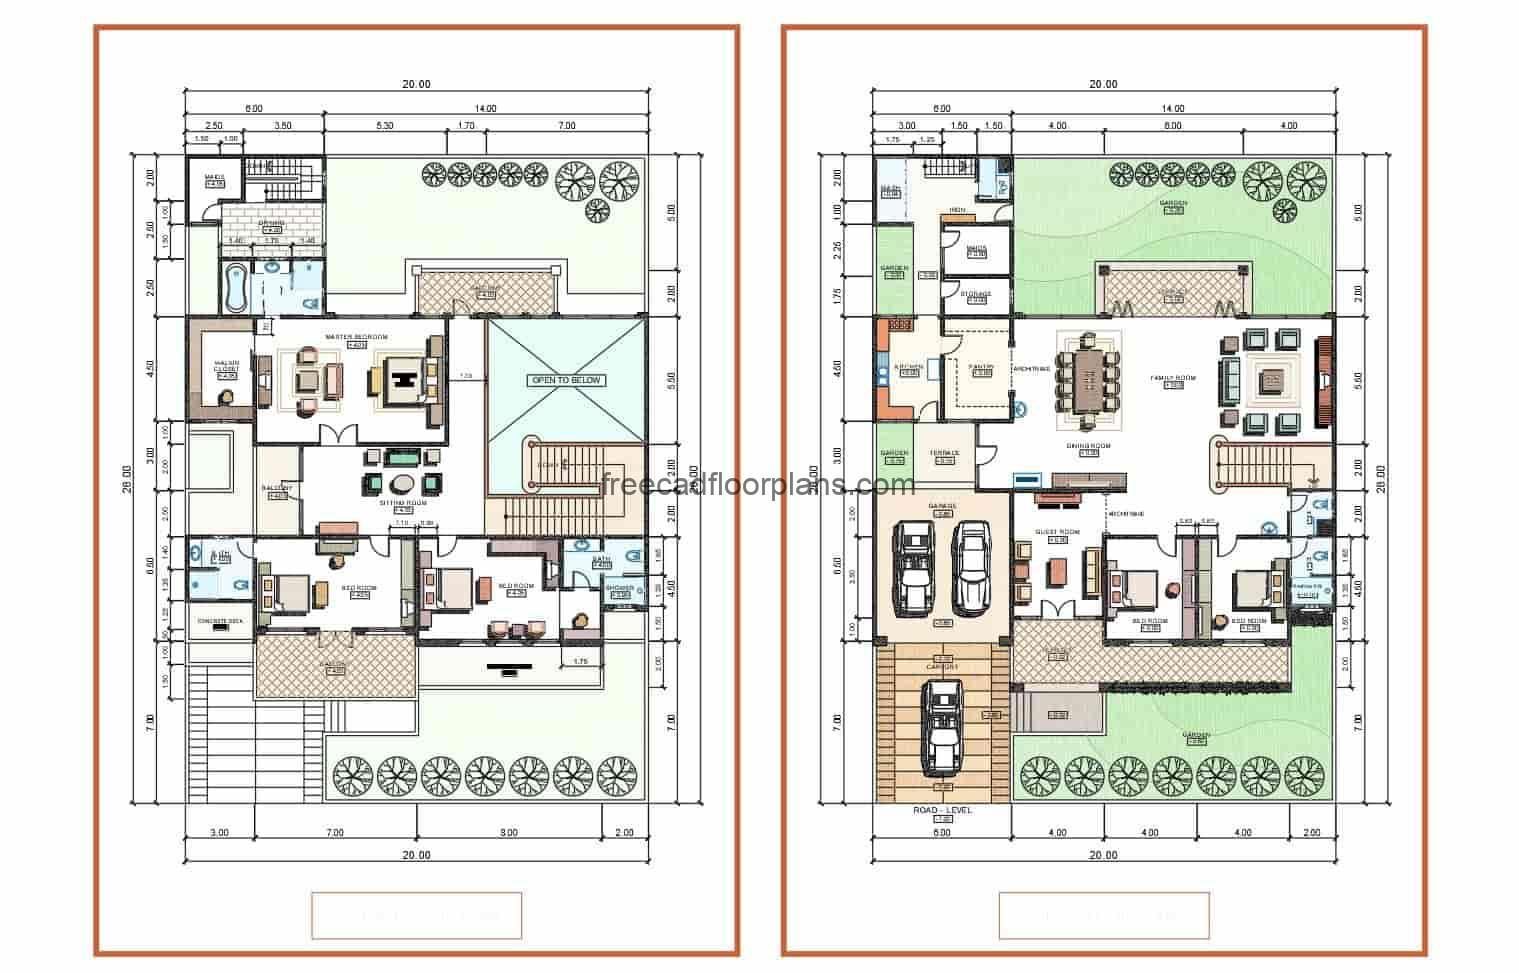 Plans of elegant residence of two levels drawn in autocad, the architectural plant is distributed in two levels for free download